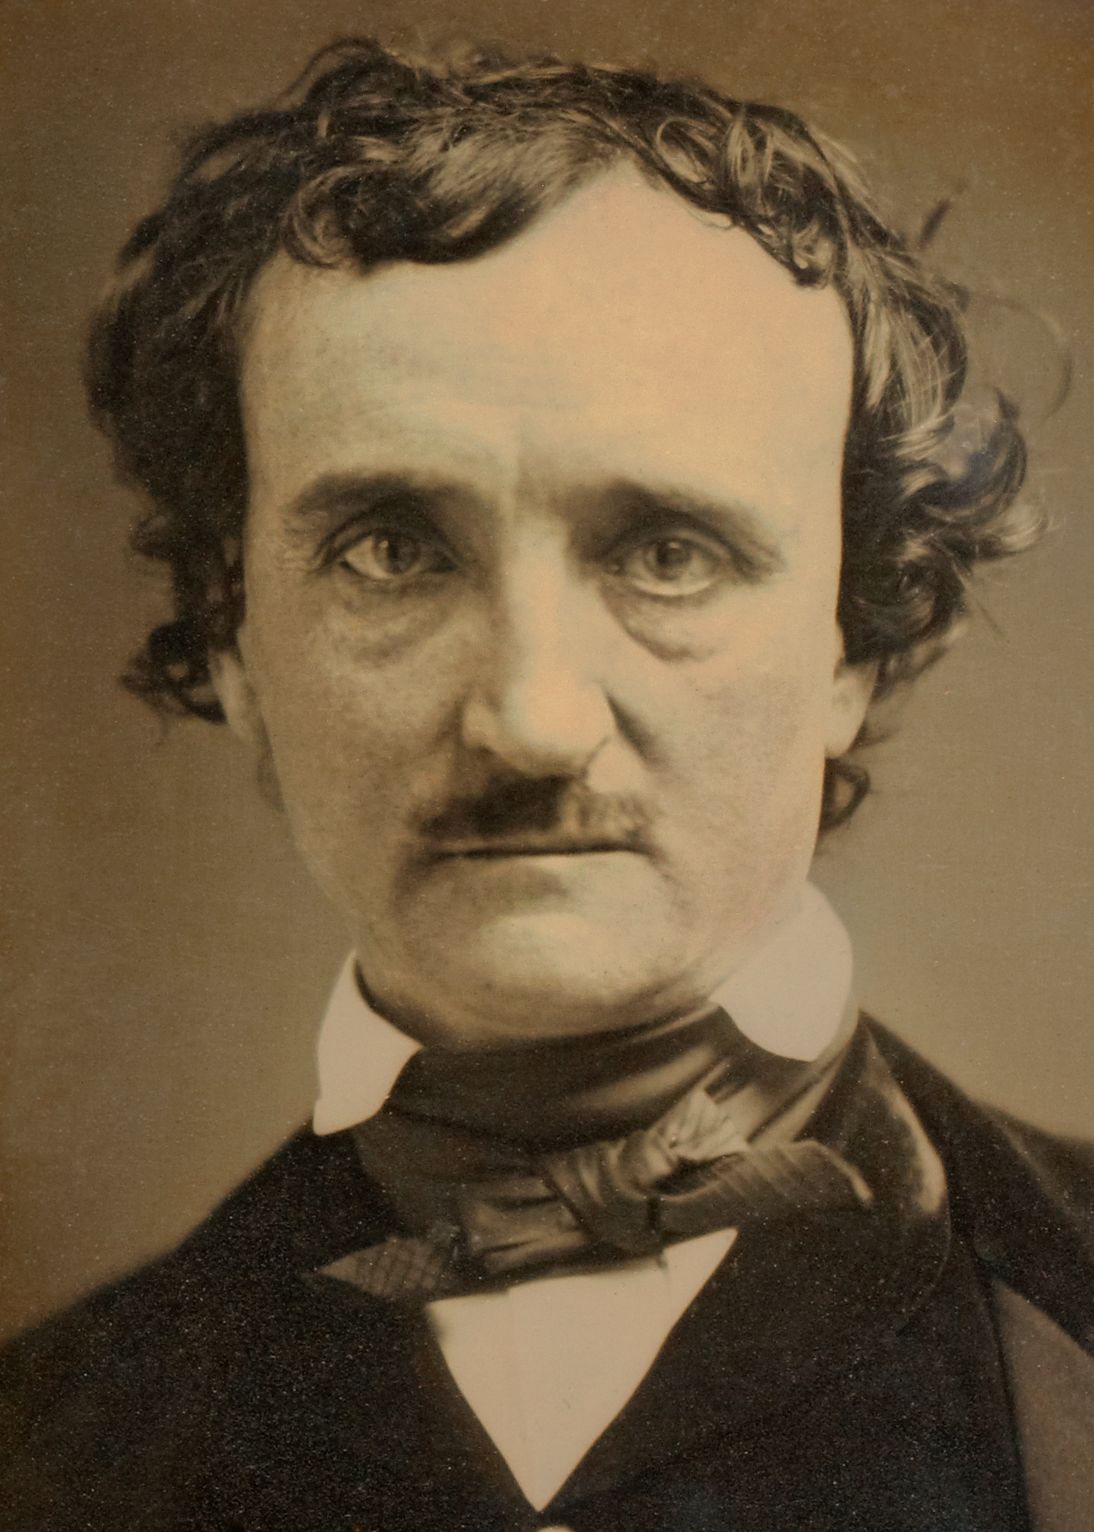 Poe knew where the dark side is—it lives in our insides.